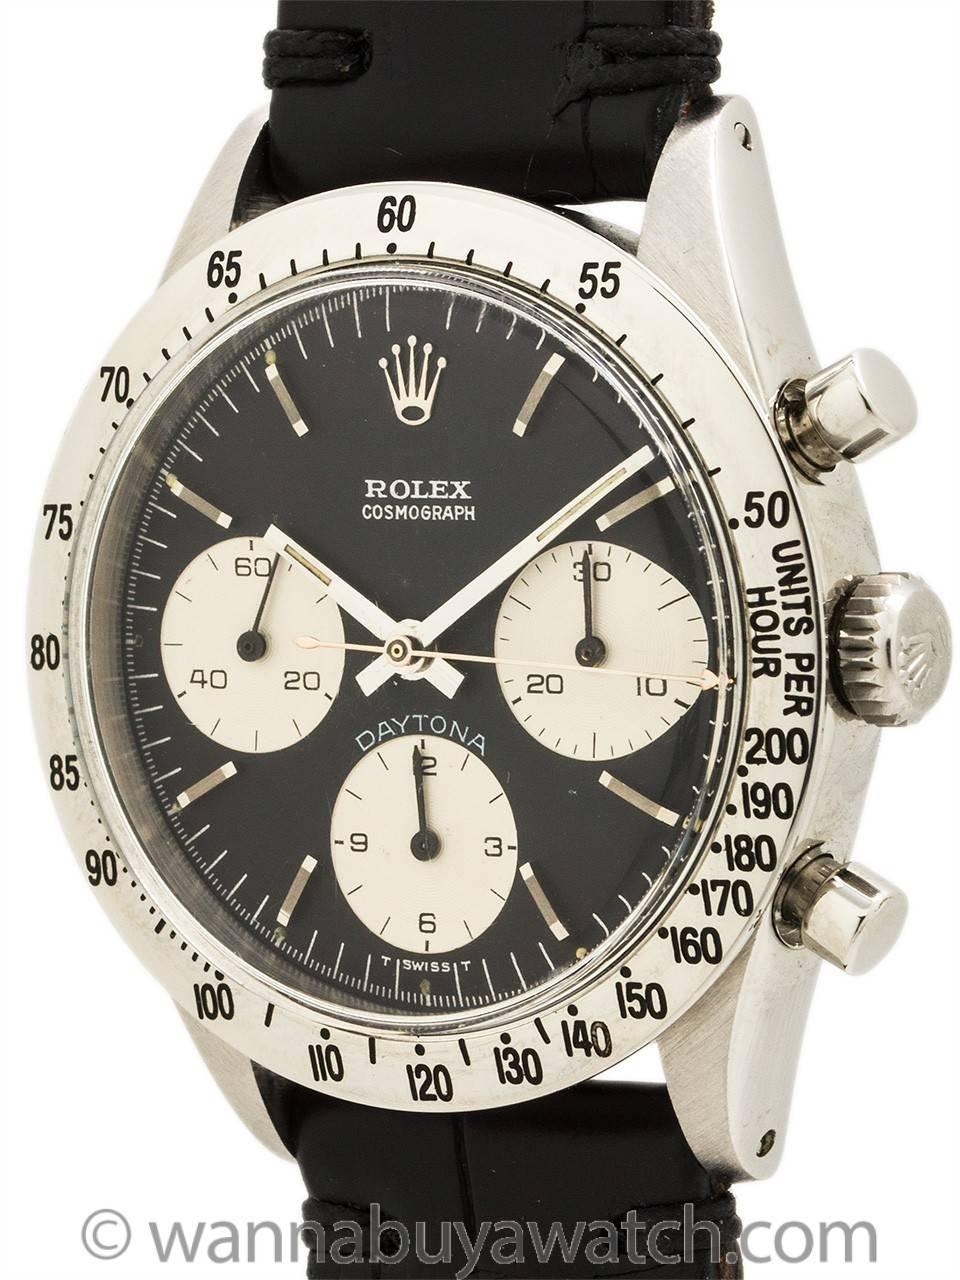 Rolex Daytona ref 6239 case serial # 1.6 million circa 1967. A very pleasing example of this classic model with original 200 mph tachometer bezel, very nice condition original black dial with white registers, dial signed T SWISS T. With original